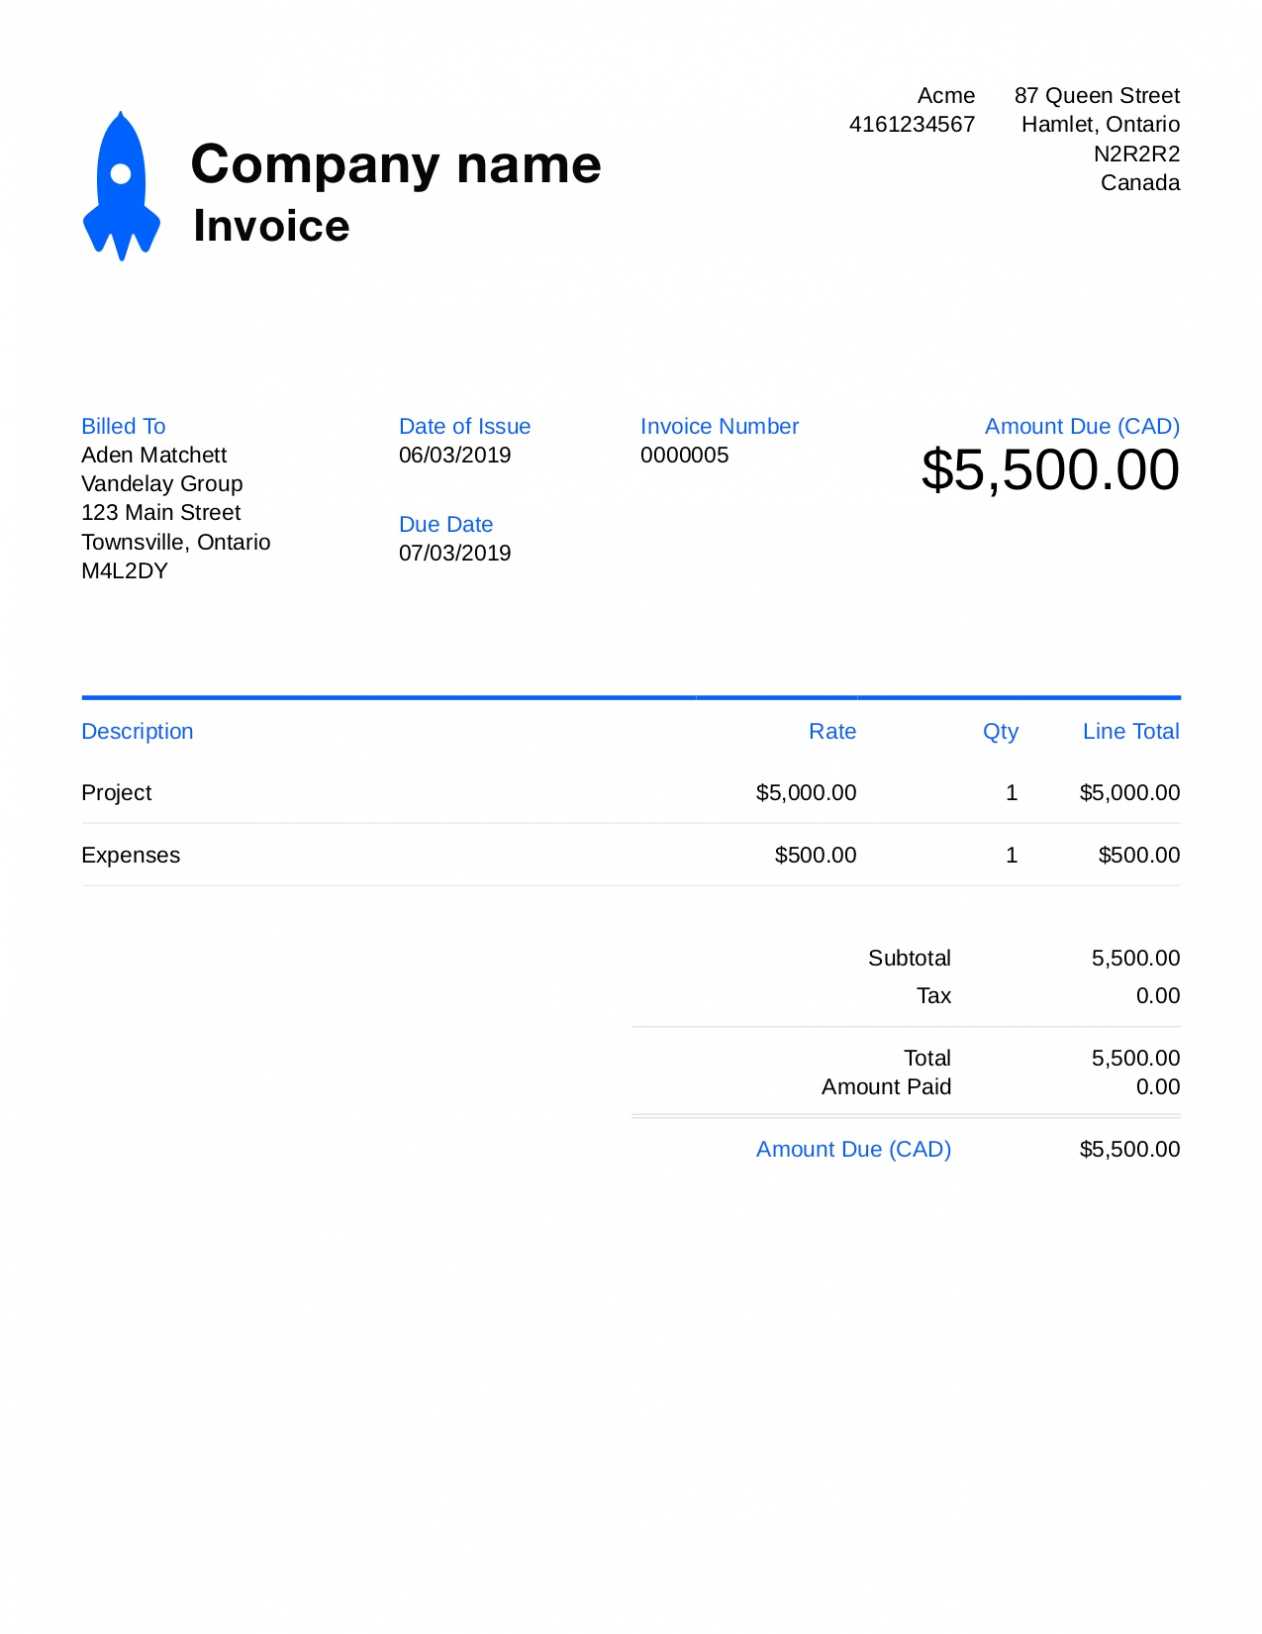 The Best Invoice Templates For The Uk | 2020 Reviews with regard to Business Invoice Template Uk